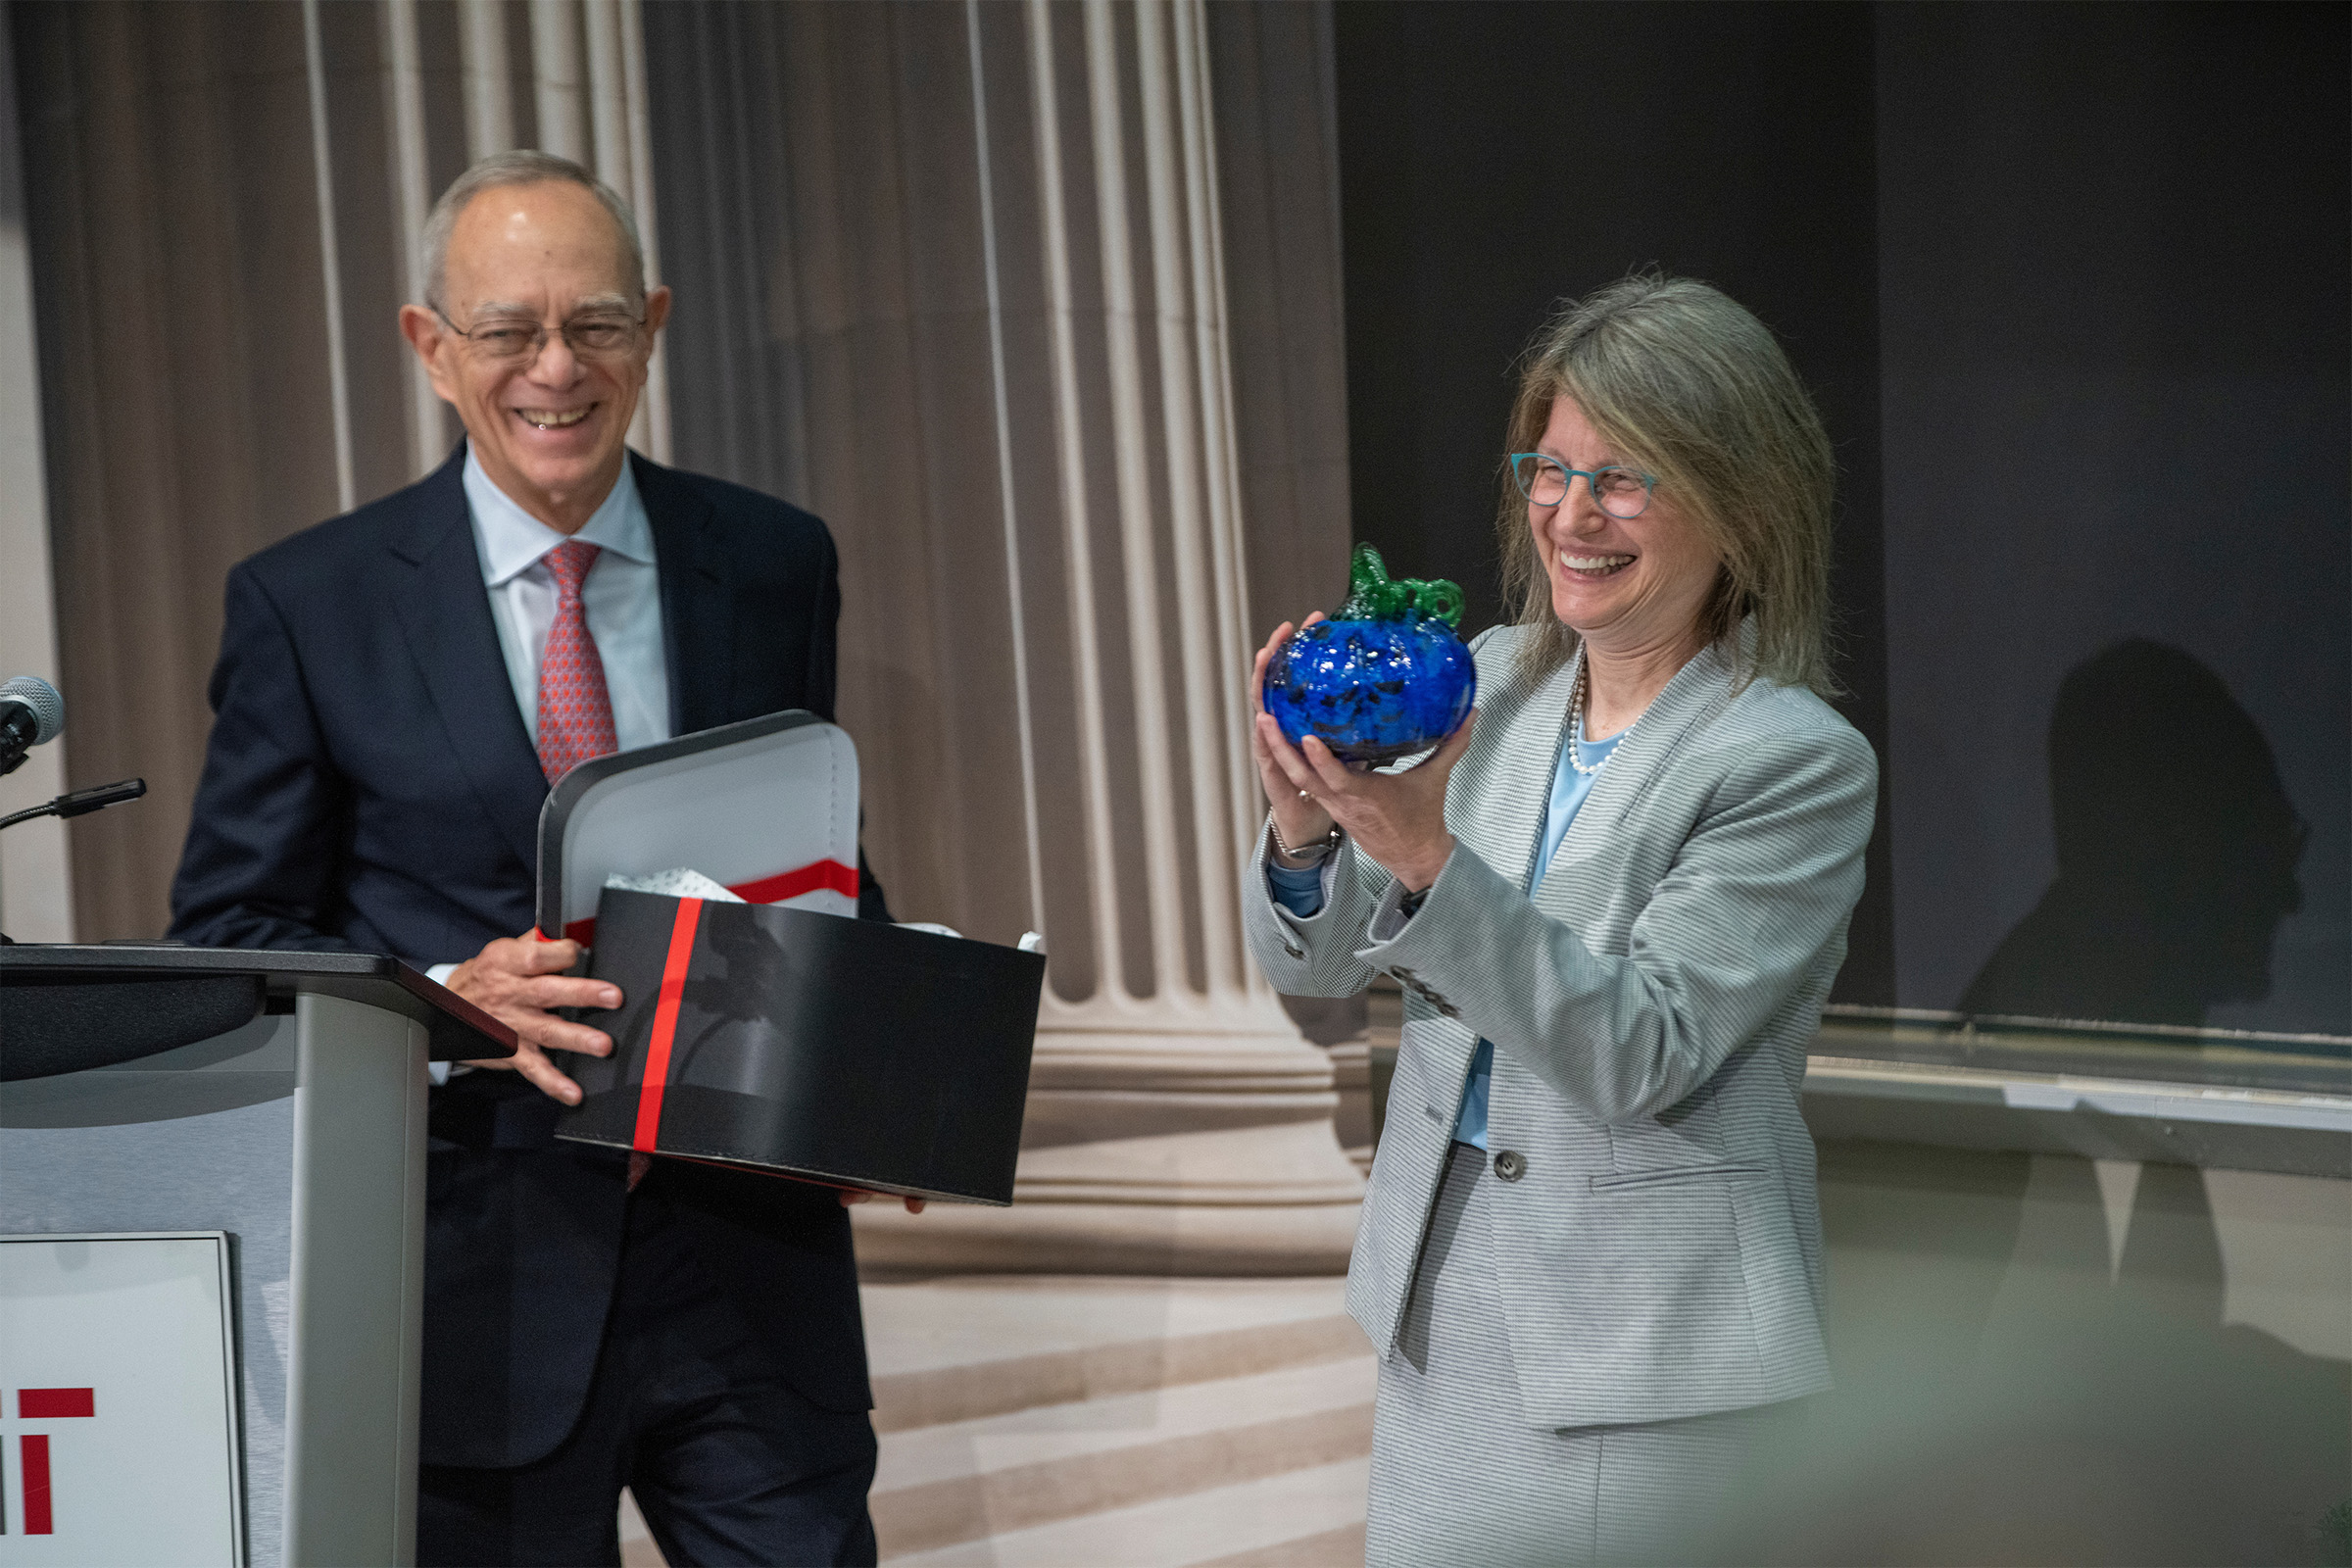 At the community introduction event, Reif presented Kornbluth with a glass pumpkin, created in MIT’s Glass Lab in the signature blue color of Duke University, where she has served as a faculty member since 1994 and as provost since 2014.